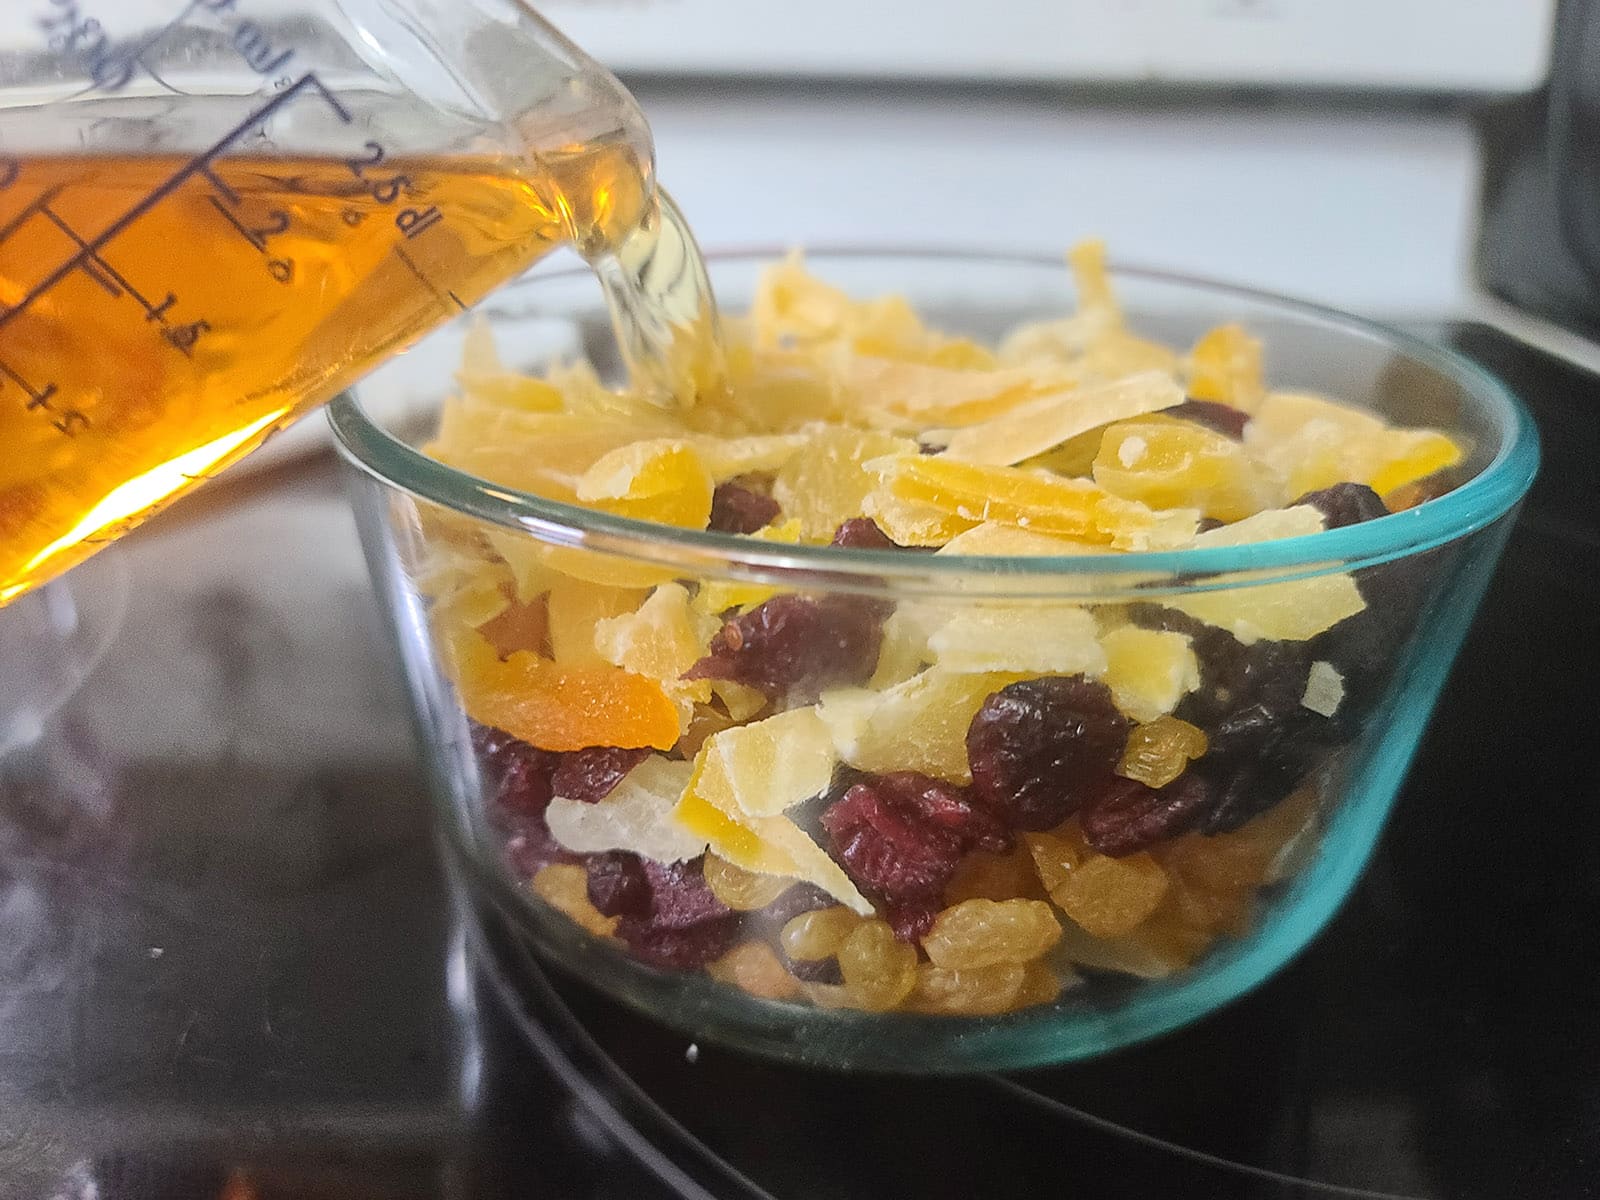 Whiskey being poured over the bowl of dried fruit.